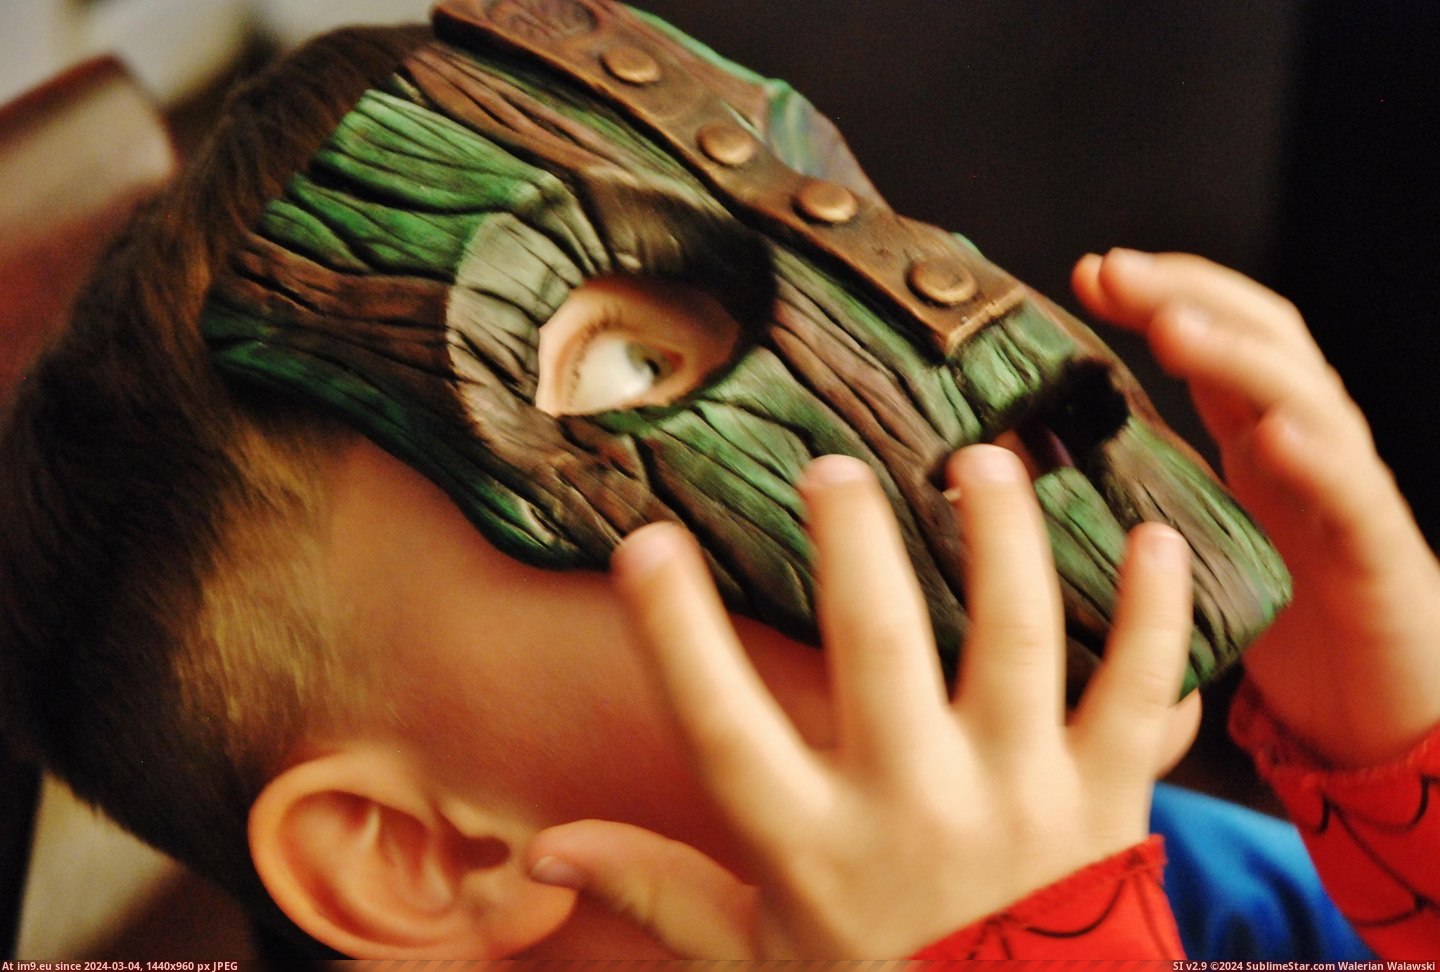 #Movie #Wanted #Stores #Superheroes #Manag #Son #Mask [Pics] My son wanted the mask from the movie the Mask, but it's all superheroes in stores these days so I made it for him. Manag Pic. (Bild von album My r/PICS favs))